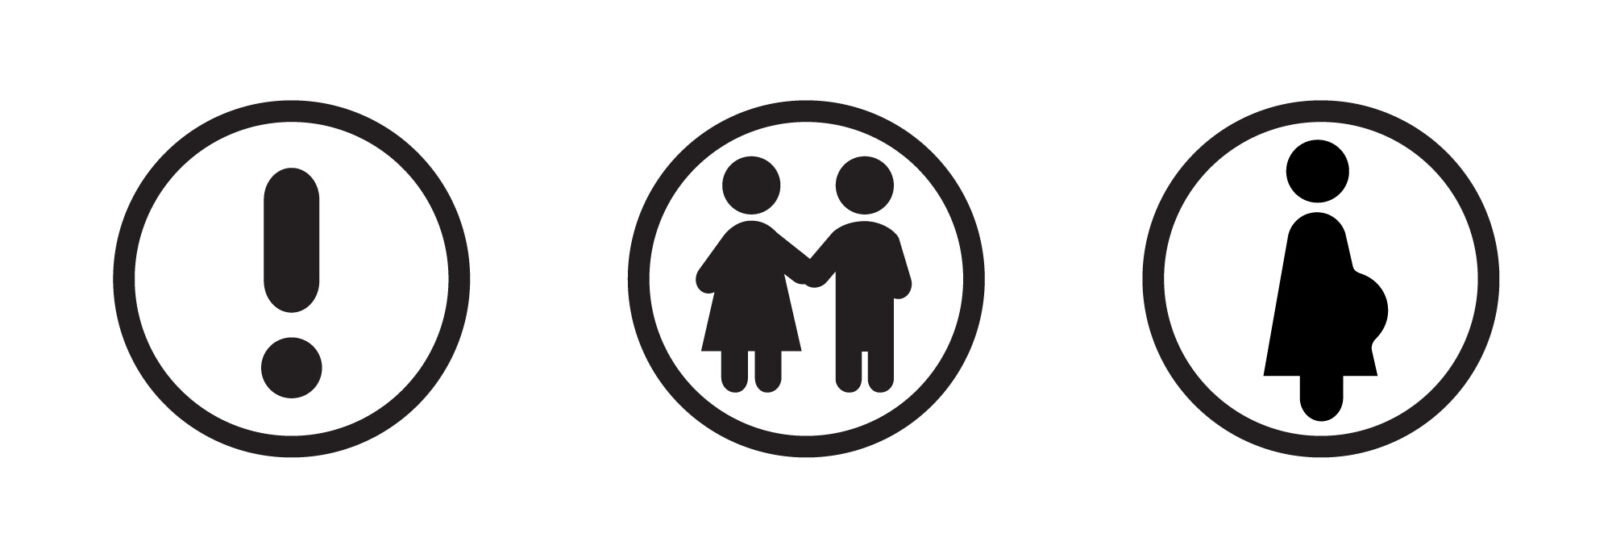 Three icons: exclamation point, two small children holding hands, pregnant woman